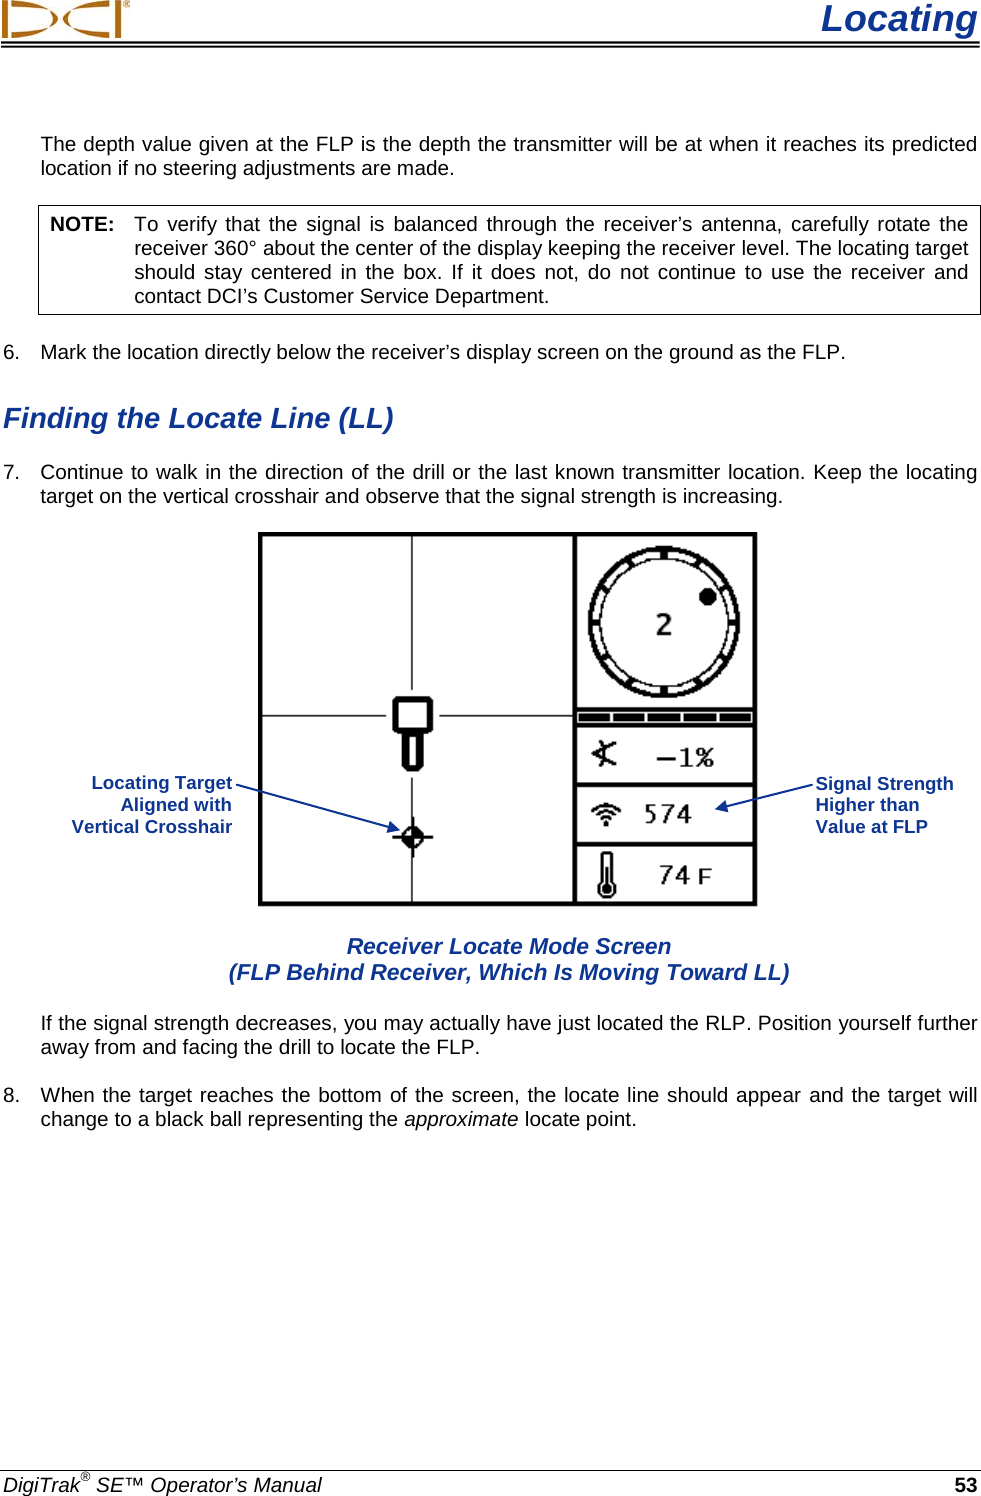  Locating DigiTrak® SE™ Operator’s Manual 53 The depth value given at the FLP is the depth the transmitter will be at when it reaches its predicted location if no steering adjustments are made.  NOTE: To verify that the signal is balanced through the receiver’s antenna, carefully rotate the receiver 360° about the center of the display keeping the receiver level. The locating target should stay centered in the box. If it does not, do  not continue to use the receiver and contact DCI’s Customer Service Department. 6. Mark the location directly below the receiver’s display screen on the ground as the FLP.  Finding the Locate Line (LL) 7. Continue to walk in the direction of the drill or the last known transmitter location. Keep the locating target on the vertical crosshair and observe that the signal strength is increasing.   Receiver Locate Mode Screen  (FLP Behind Receiver, Which Is Moving Toward LL) If the signal strength decreases, you may actually have just located the RLP. Position yourself further away from and facing the drill to locate the FLP. 8. When the target reaches the bottom of the screen, the locate line should appear and the target will change to a black ball representing the approximate locate point.  Signal Strength Higher than Value at FLP Locating Target  Aligned with  Vertical Crosshair  